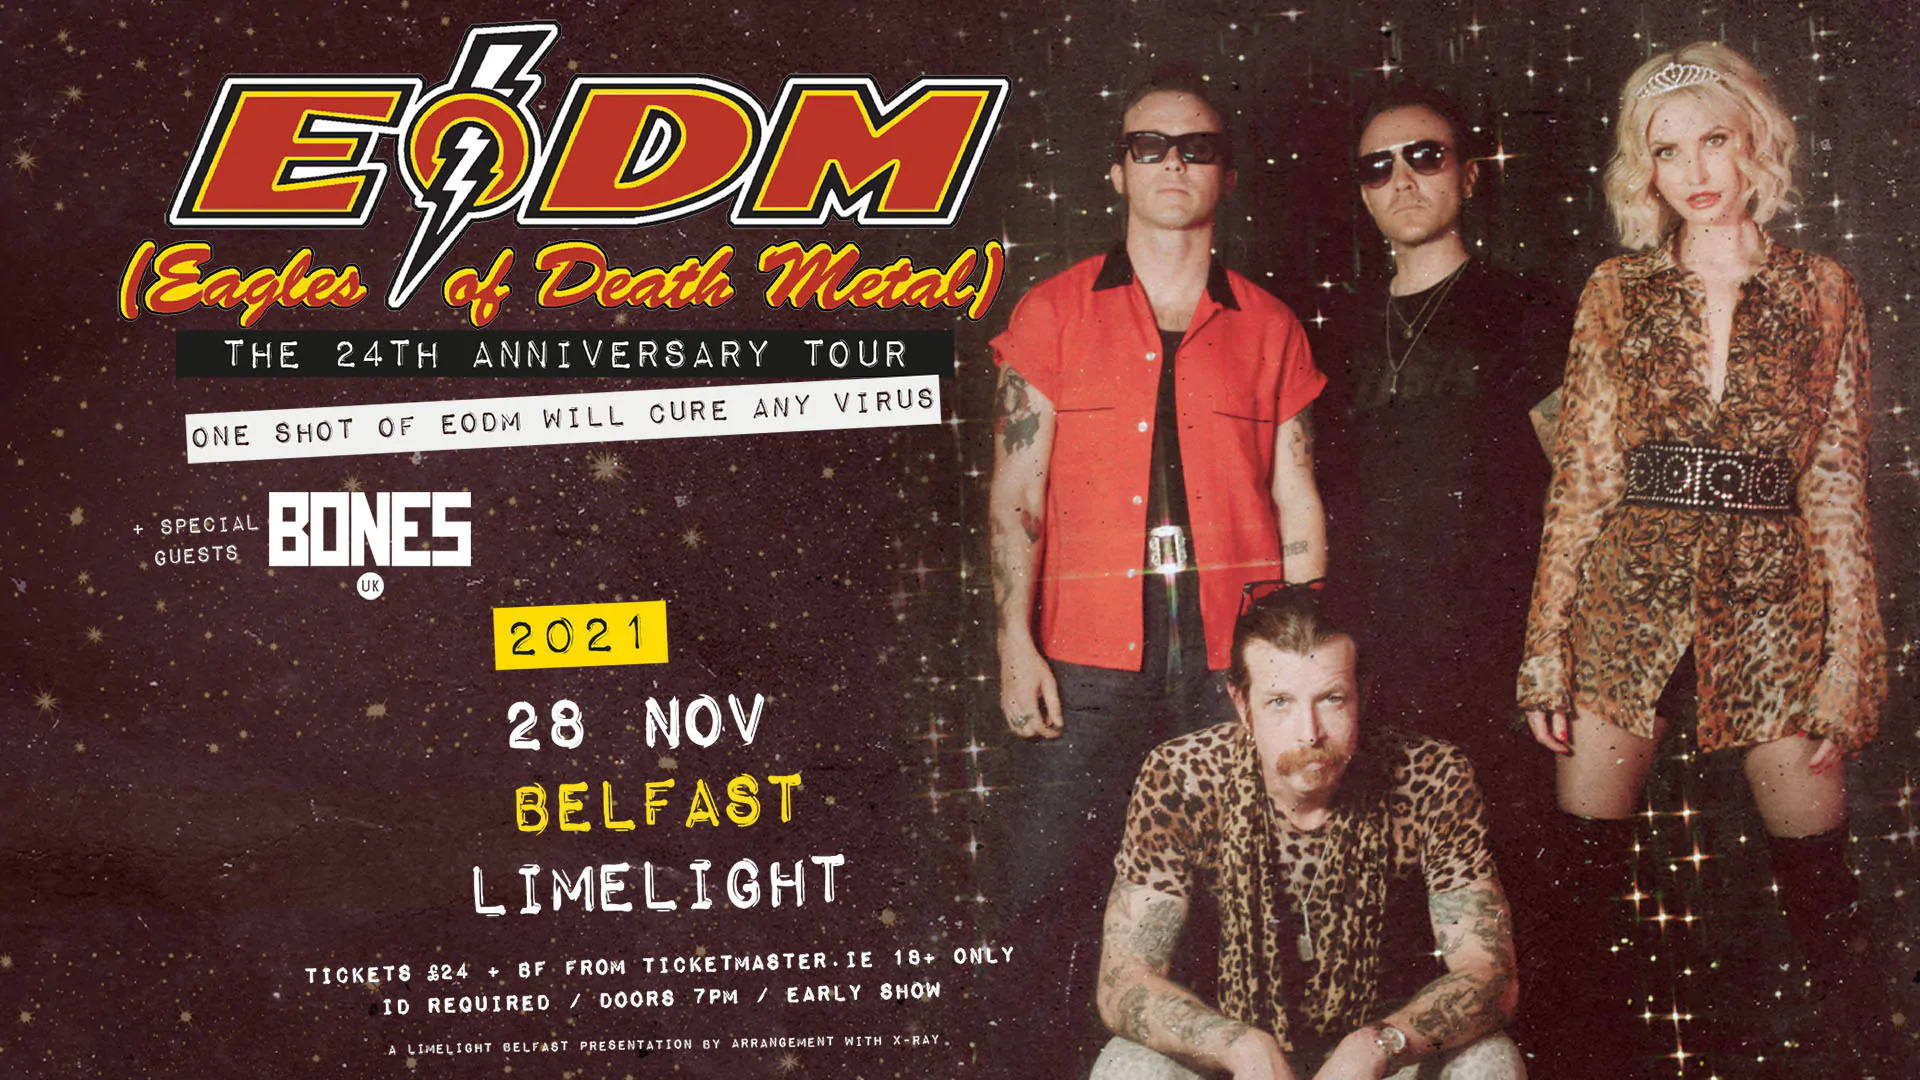 EAGLES OF DEATH METAL announce headline Belfast show at Limelight 1, Sunday 28th November